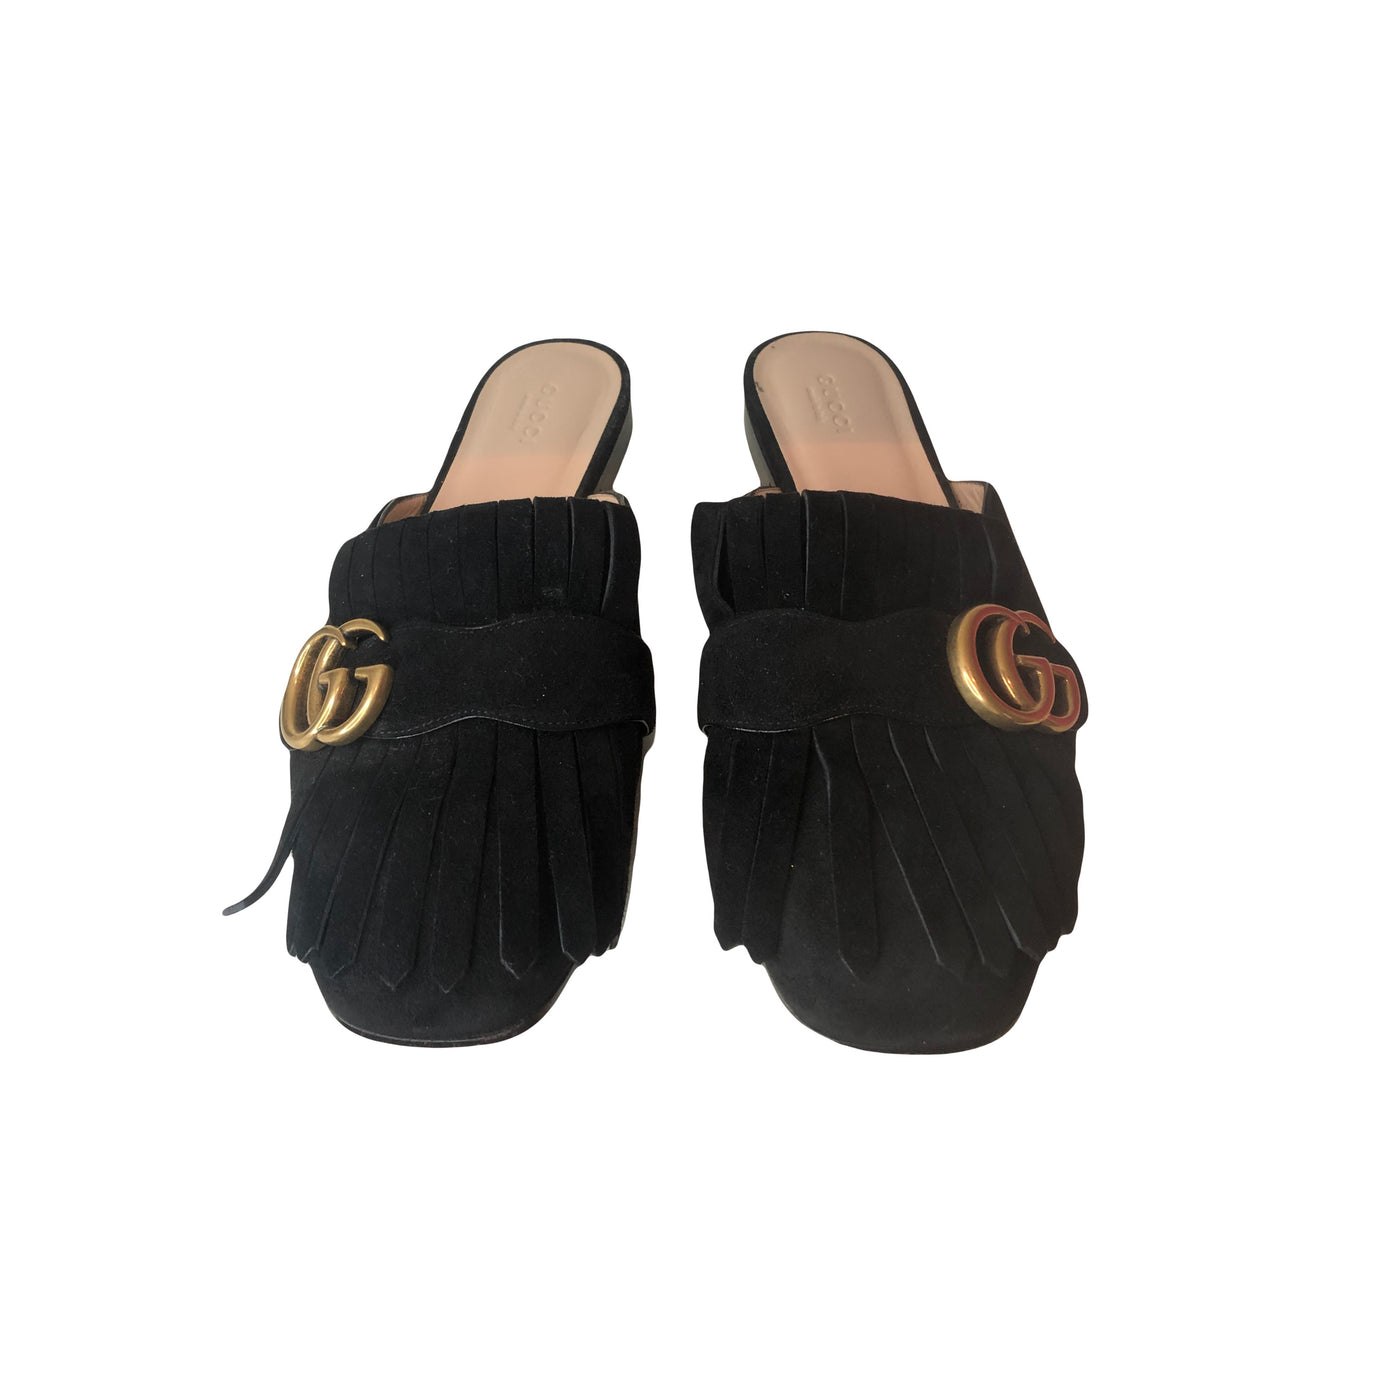 GUCCI Marmont Suede gold buckle flat mules size 37.5